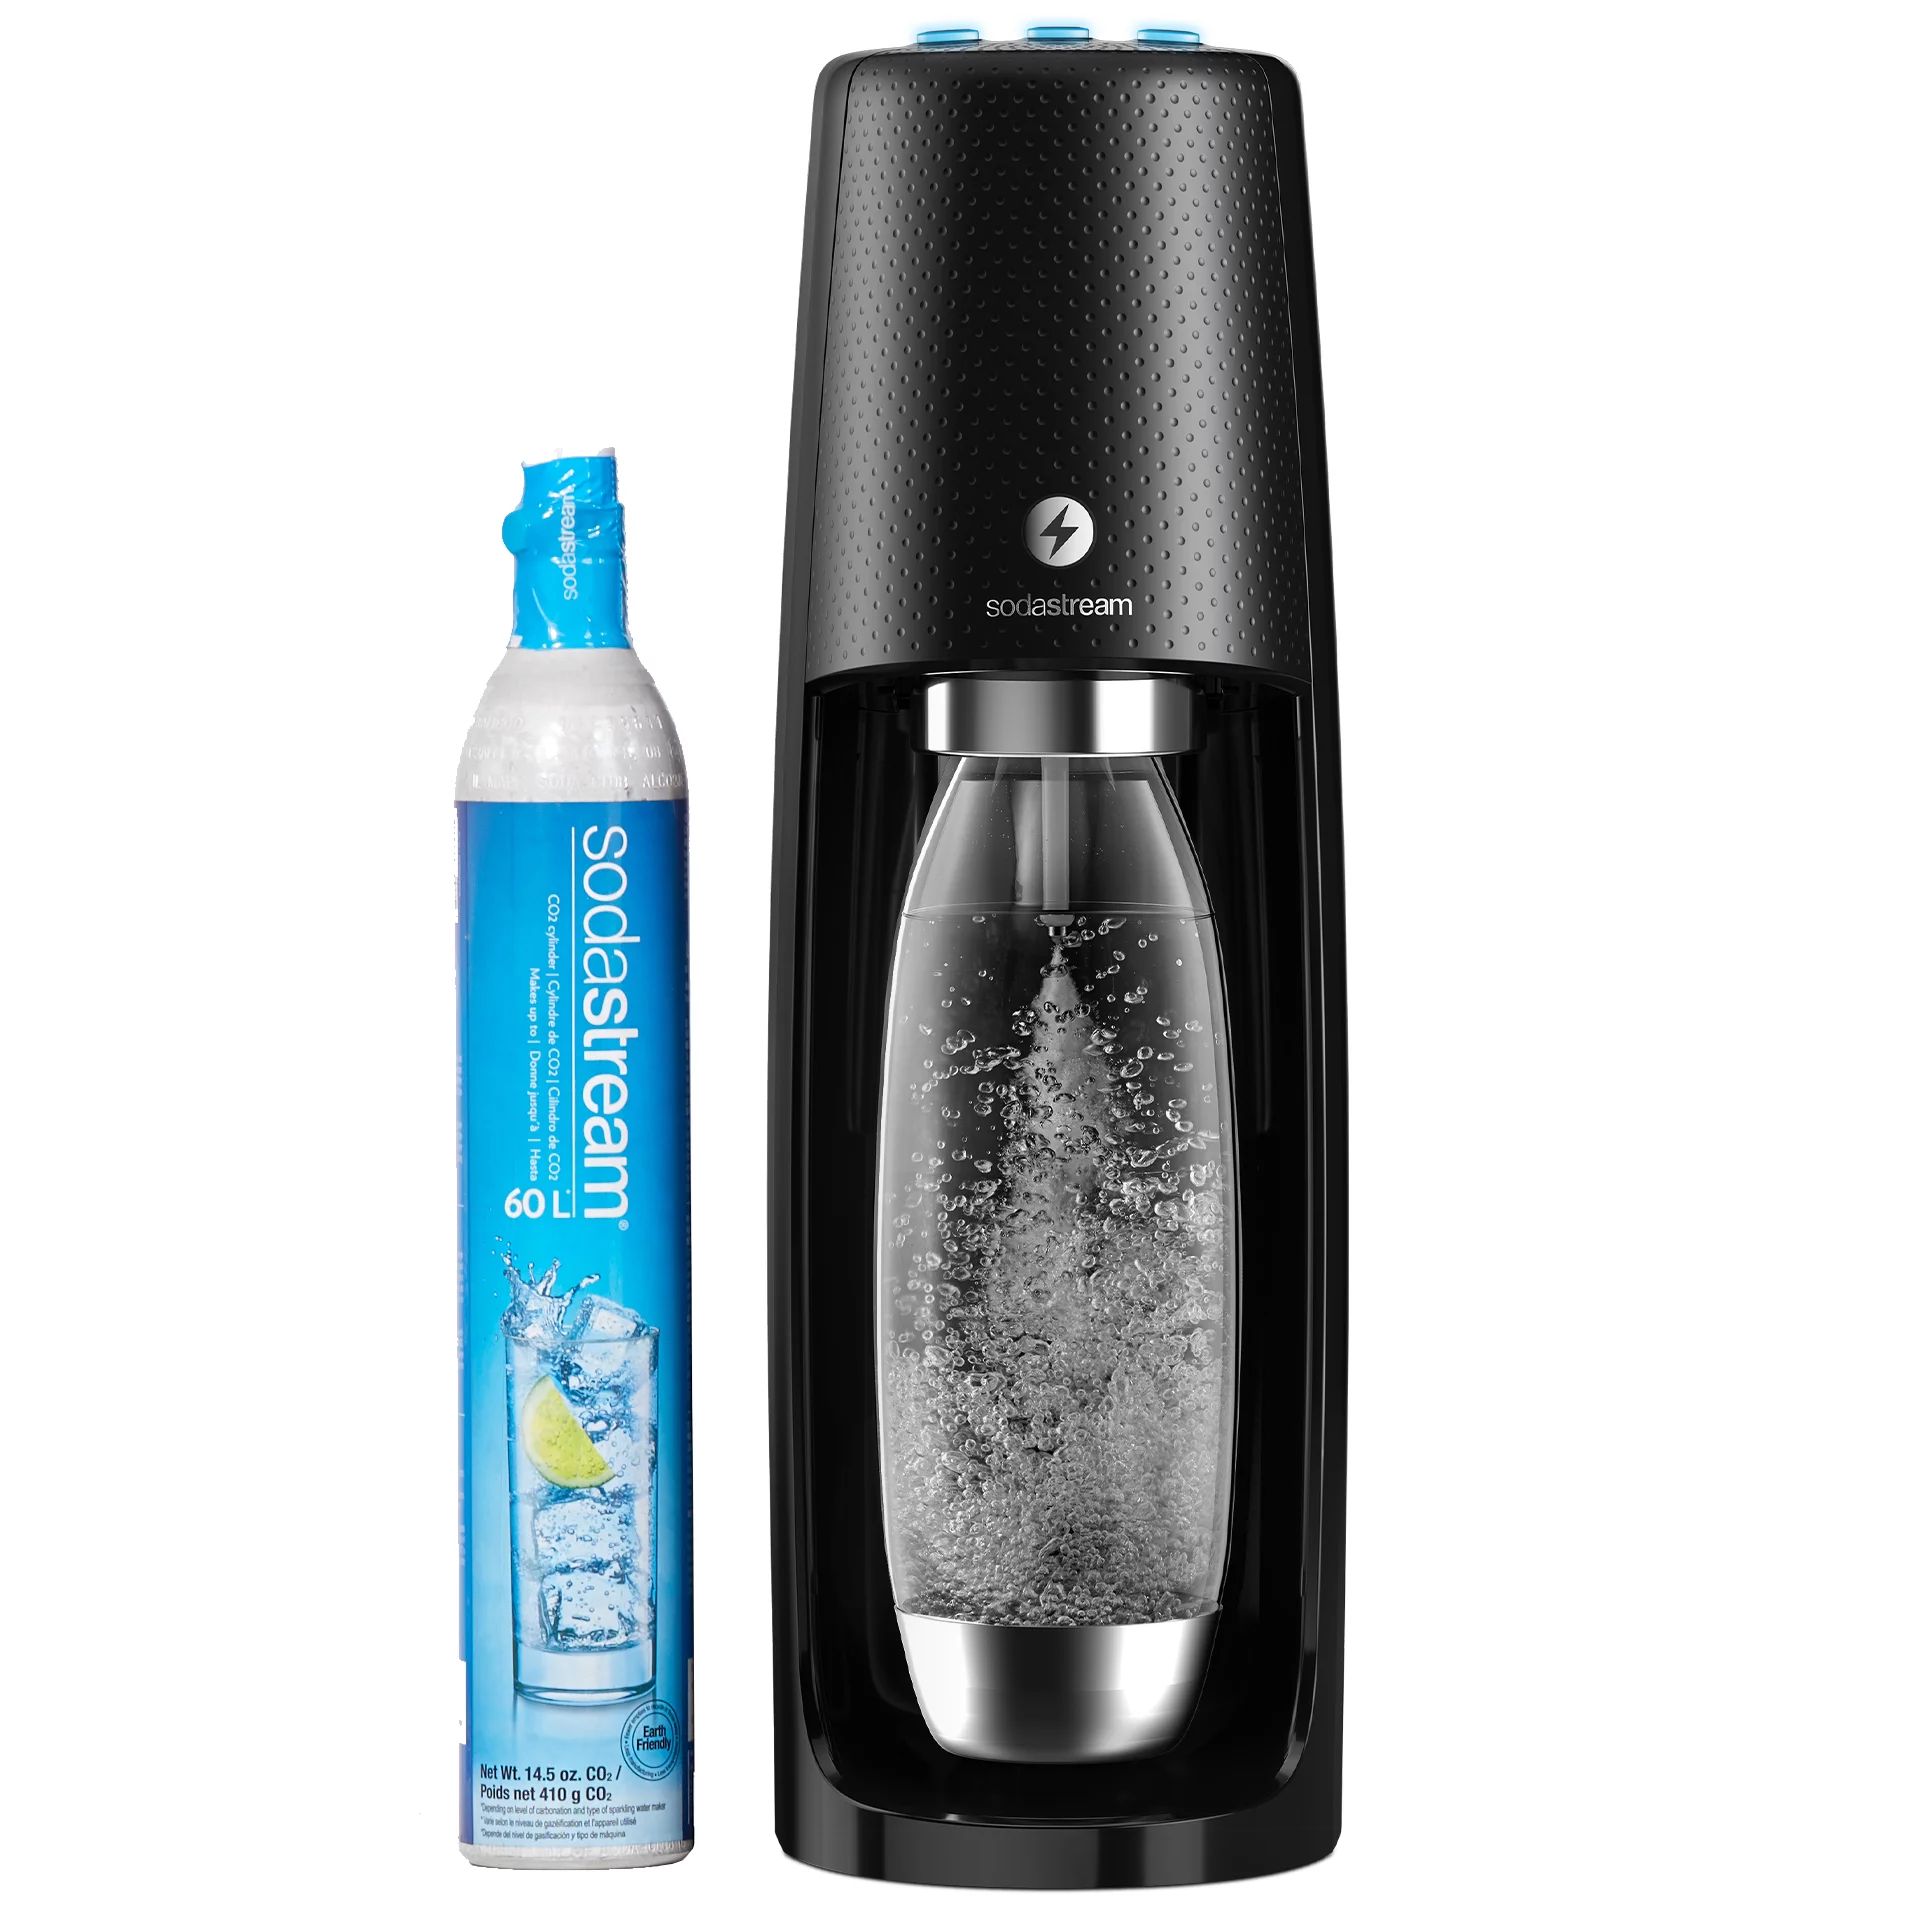 SodaStream One Touch Electric Sparkling Water Maker Kit | Walmart (US)